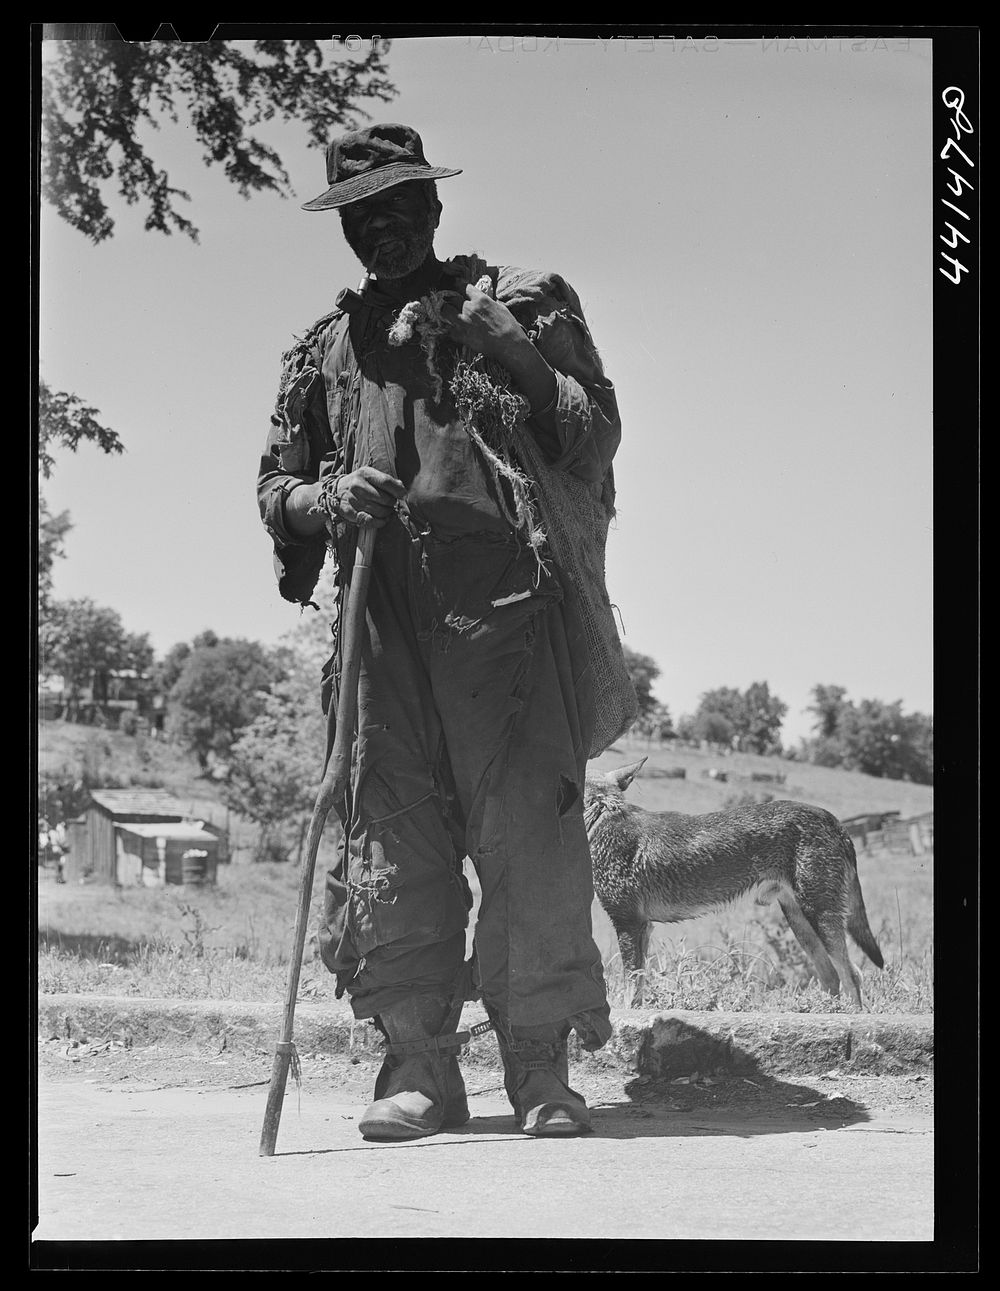  rag man. Greensboro, Greene County, Georgia. Sourced from the Library of Congress.